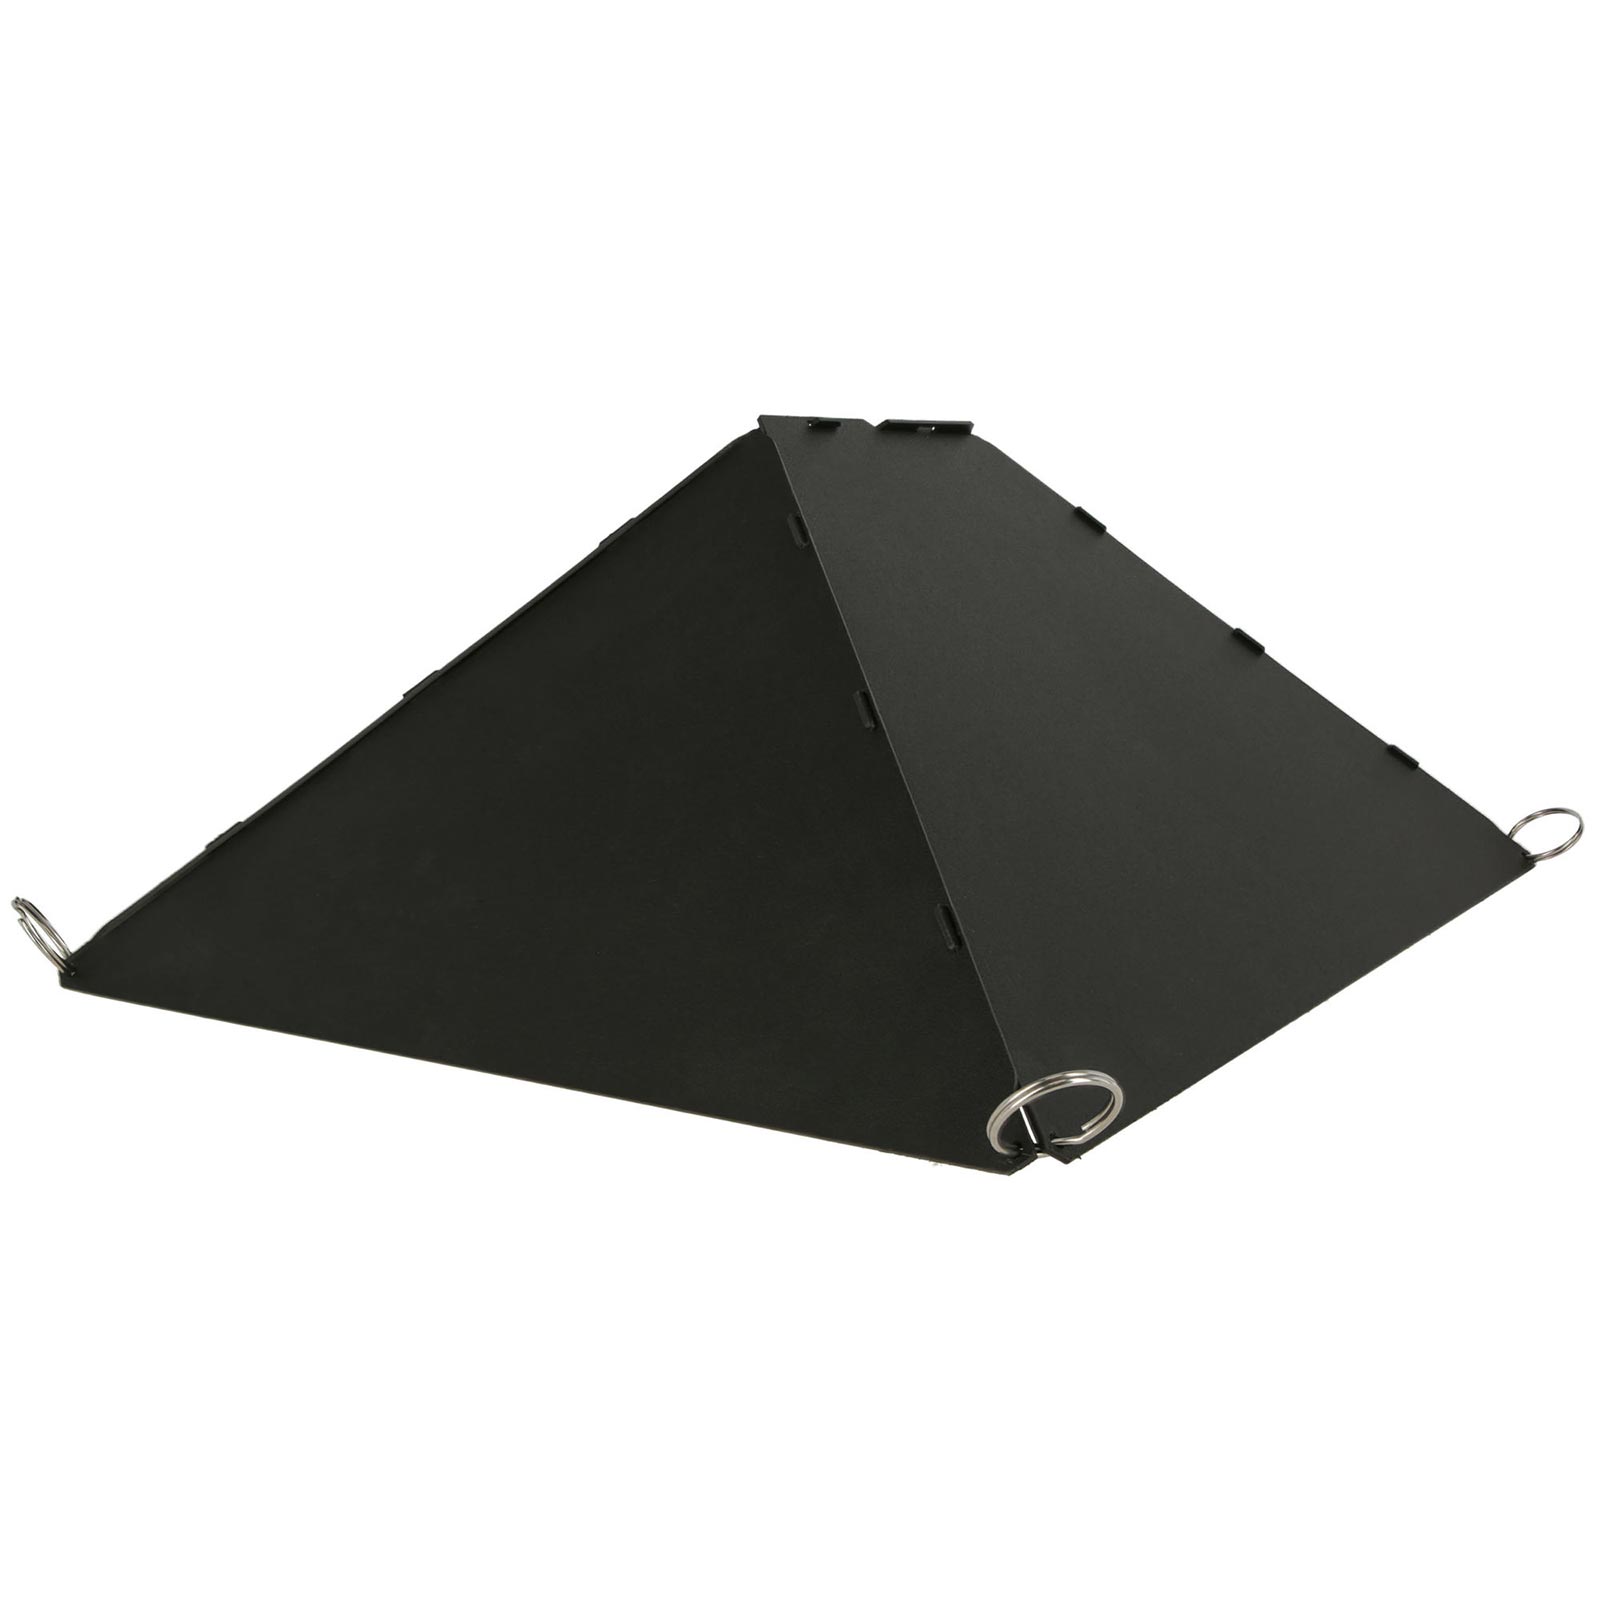 Protective Cover for Heating Plate CosyHeat 40 x 50 cm